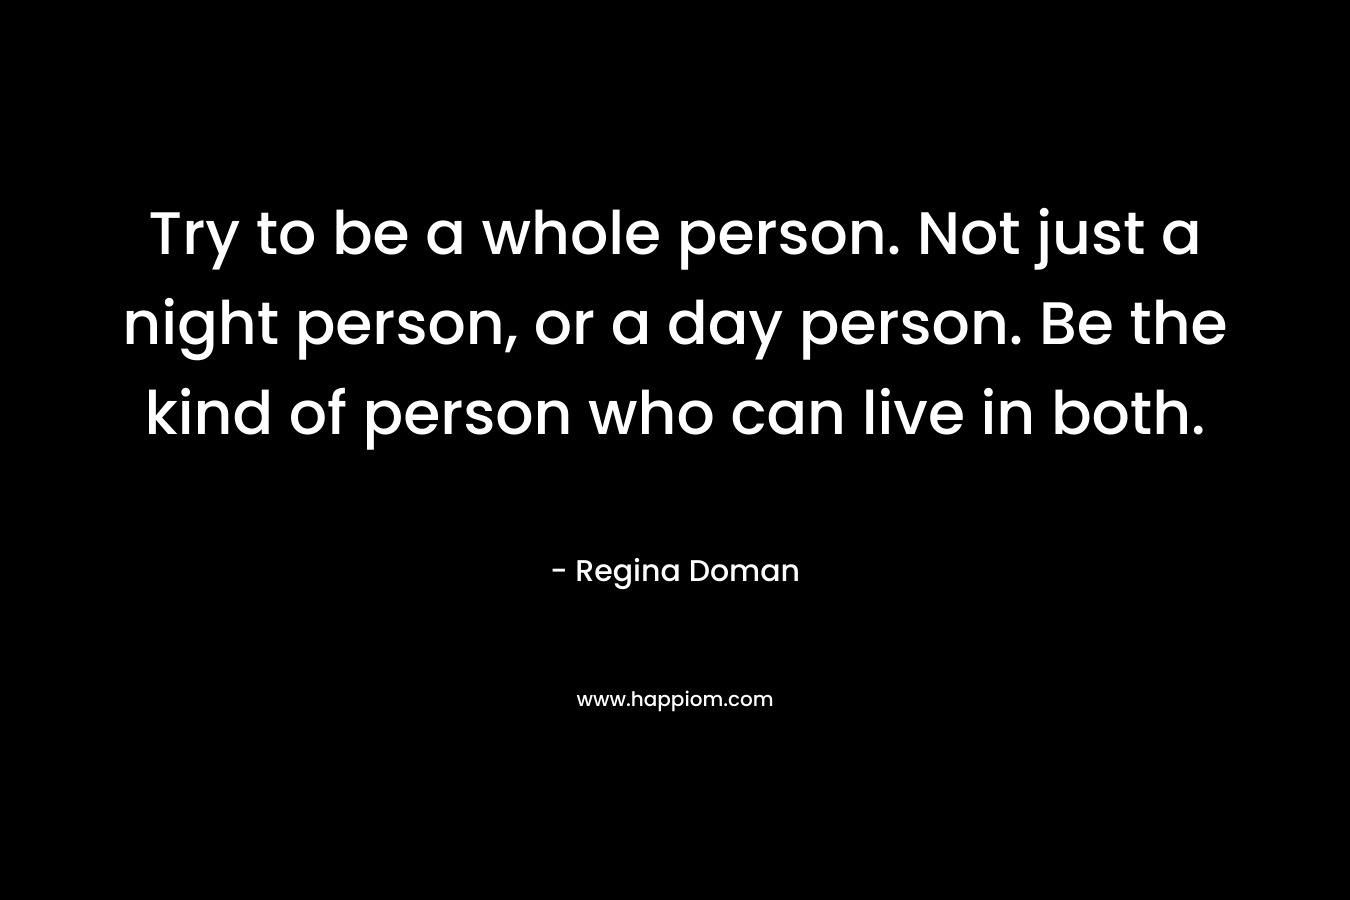 Try to be a whole person. Not just a night person, or a day person. Be the kind of person who can live in both.